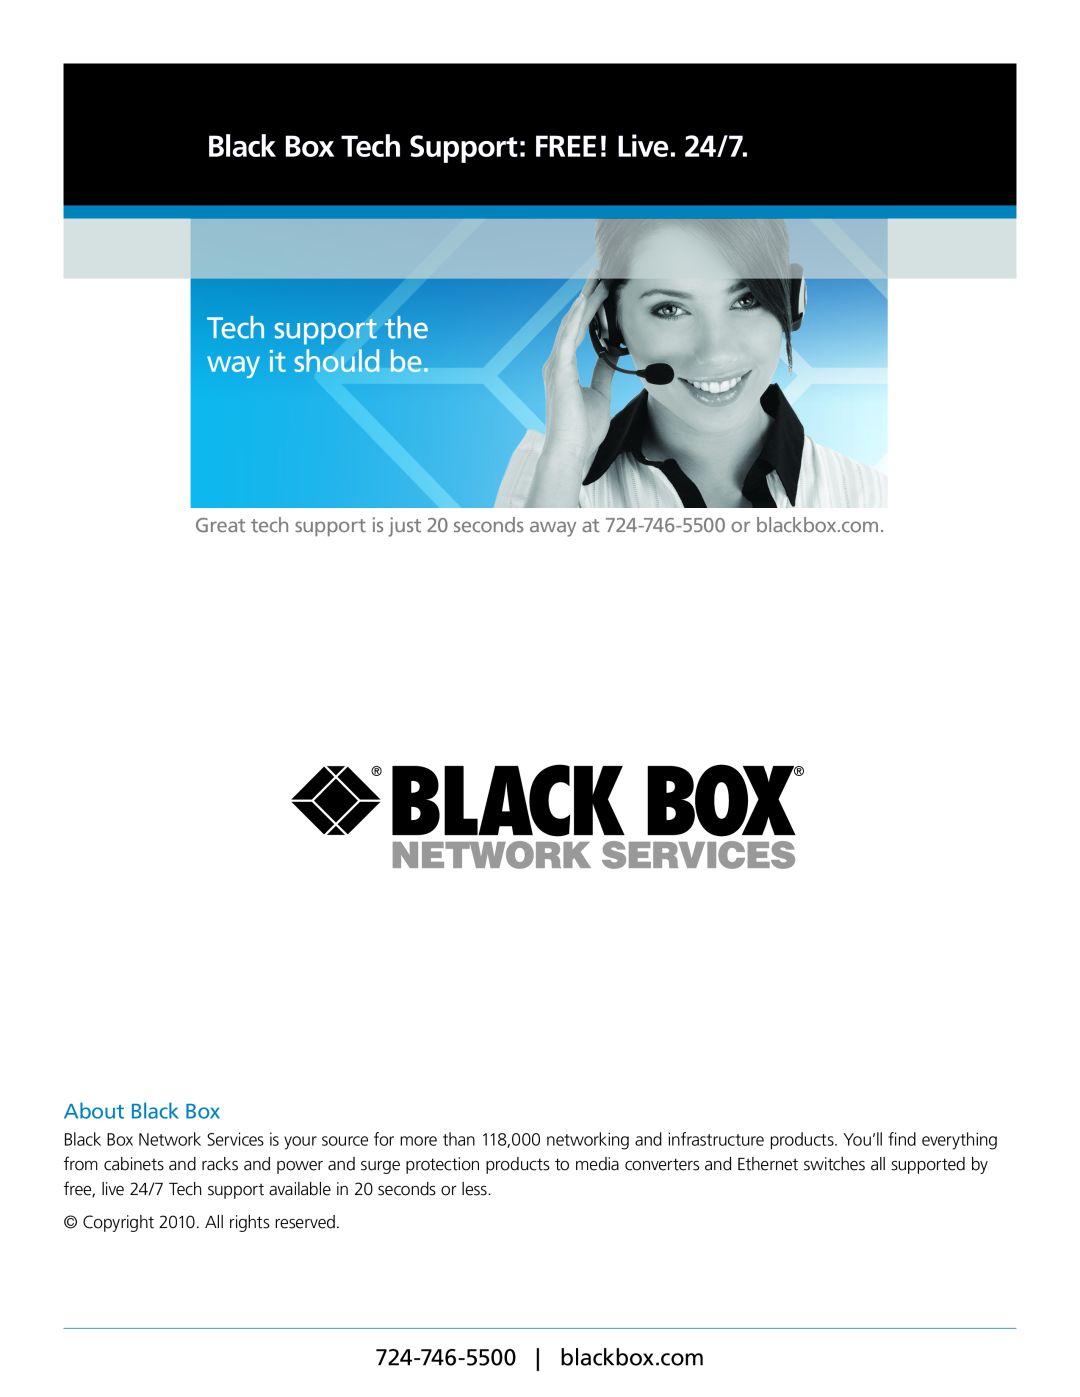 Black Box PoE PSE Media Converter manual Black Box Tech Support FREE! Live. 24/7, Tech support the way it should be 